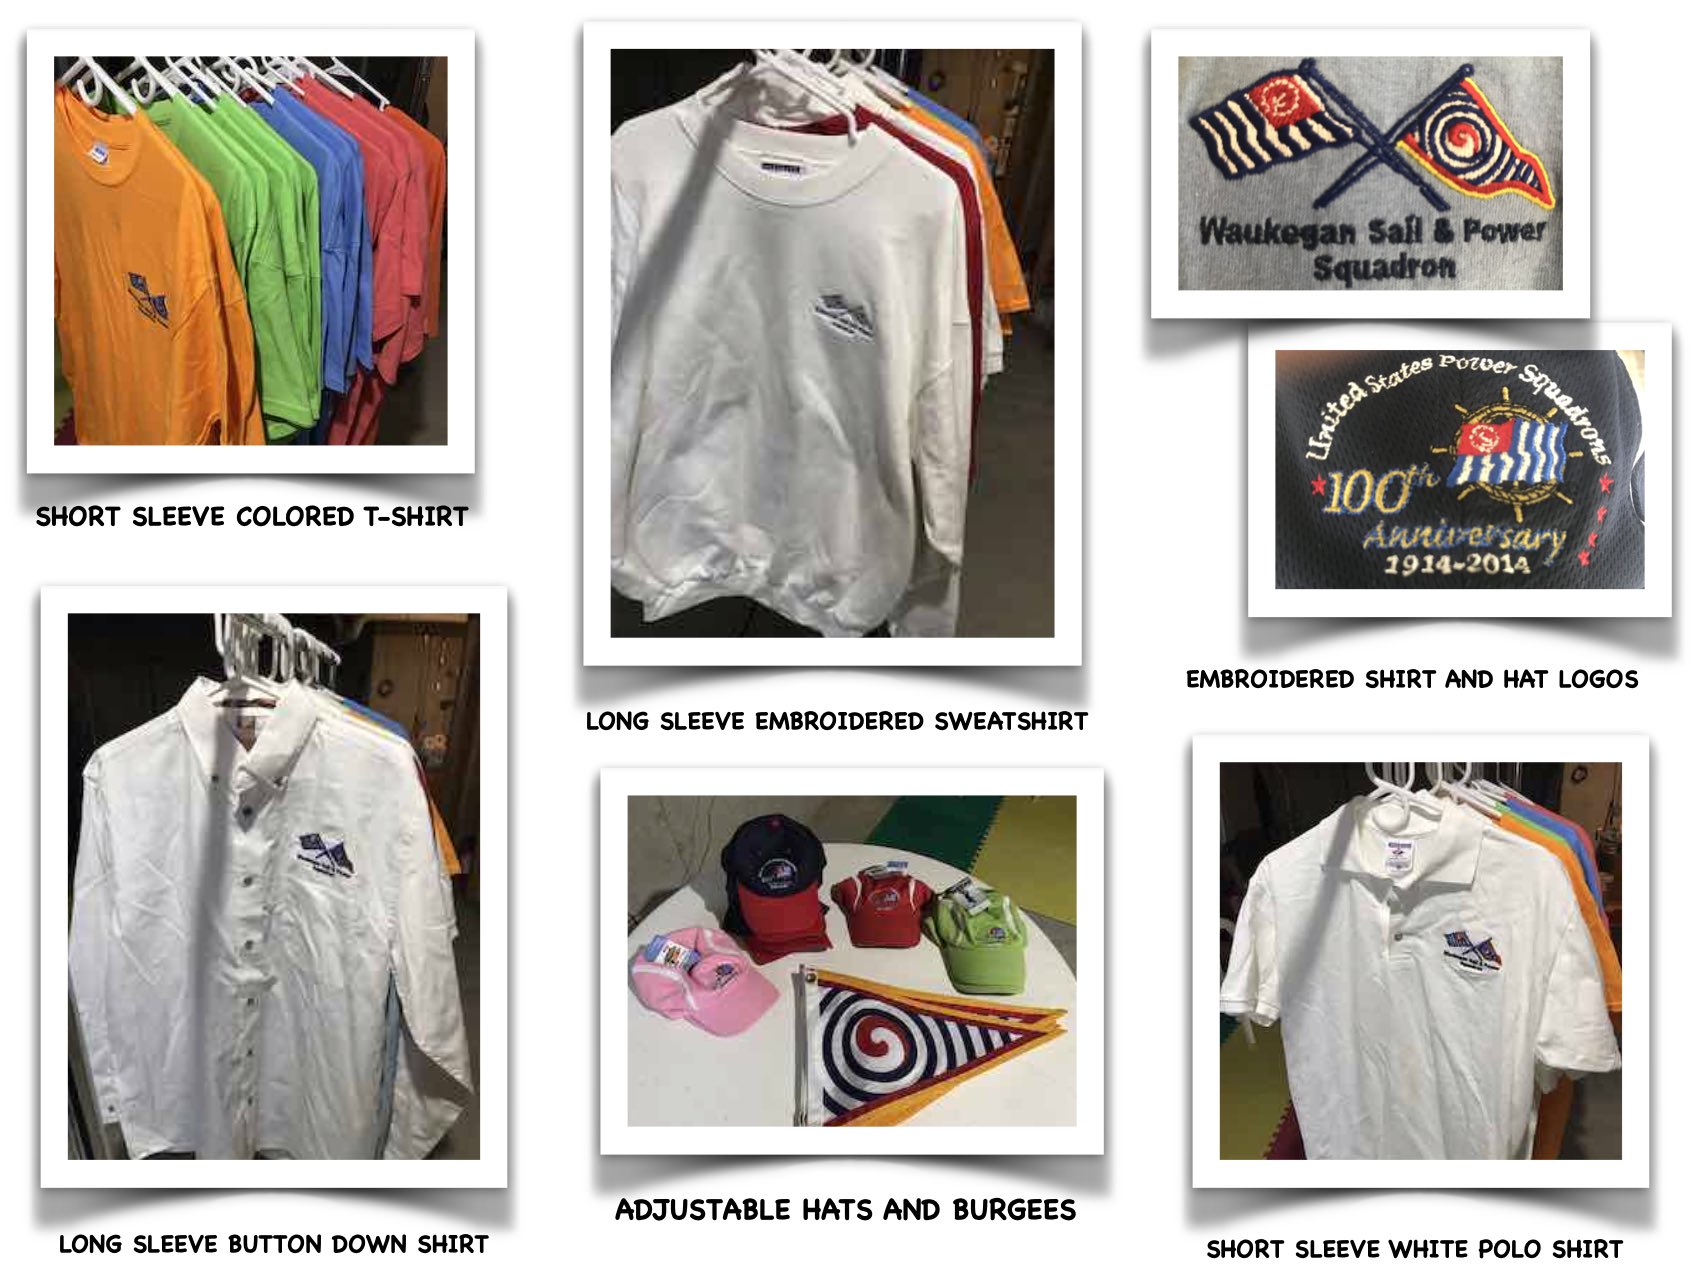 Pictured are various Squadron apparel choices, including short sleeved colored t-shirts, short sleeved white polo shirts, long sleeved button down shirts, long sleeved embroidered sweatshirts, embroidered baseball hats and also WSPS burgees.